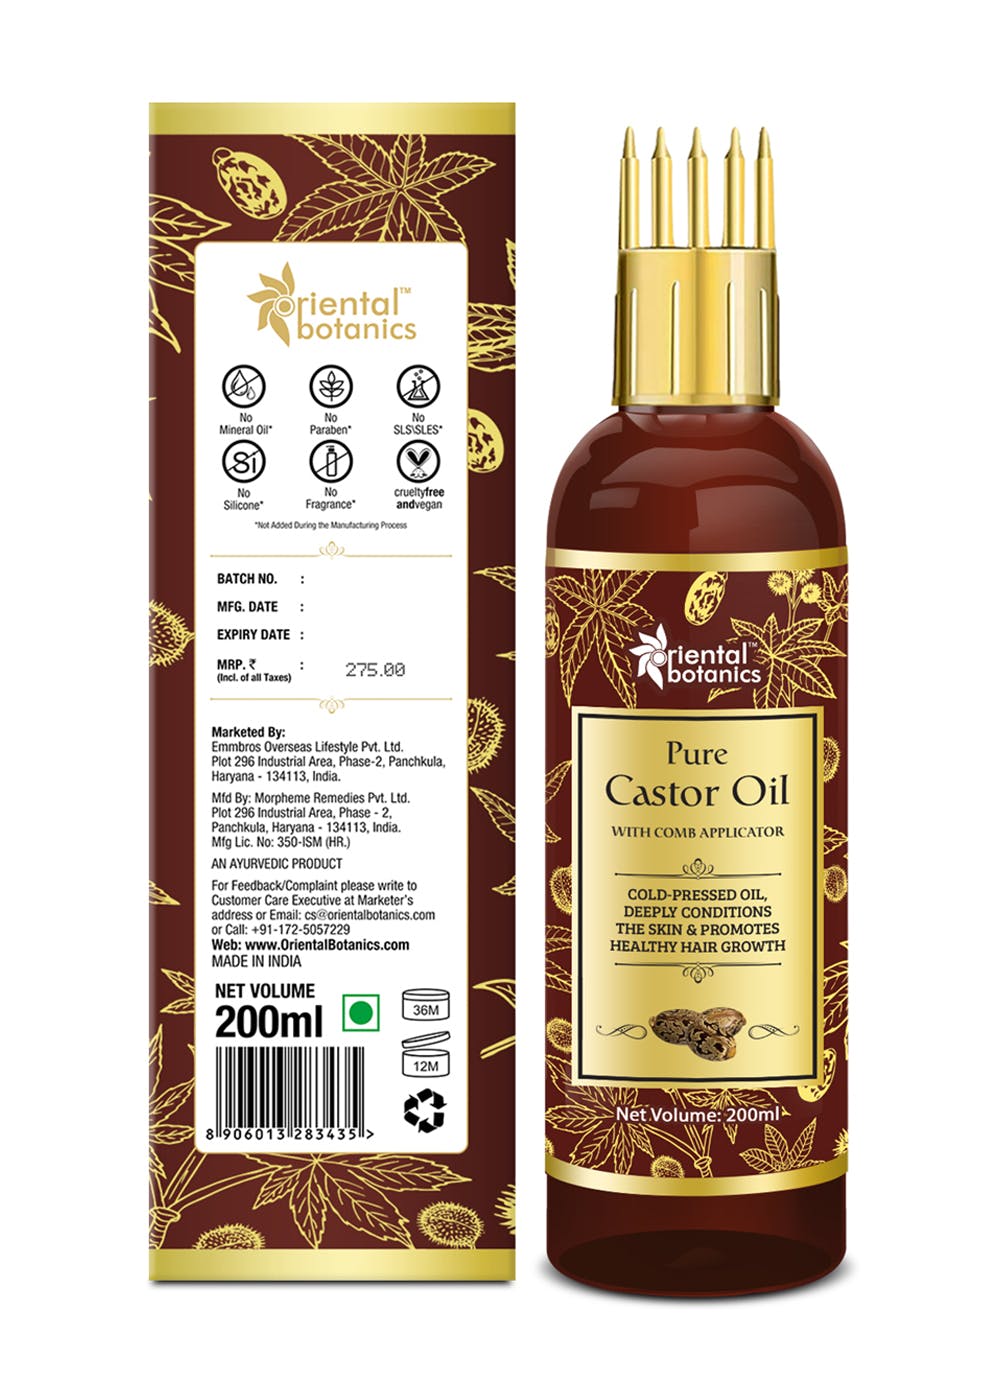 Get Castor Oil for Eyelashes, Hair and Skin Care - 200ml at ₹ 275 | LBB Shop